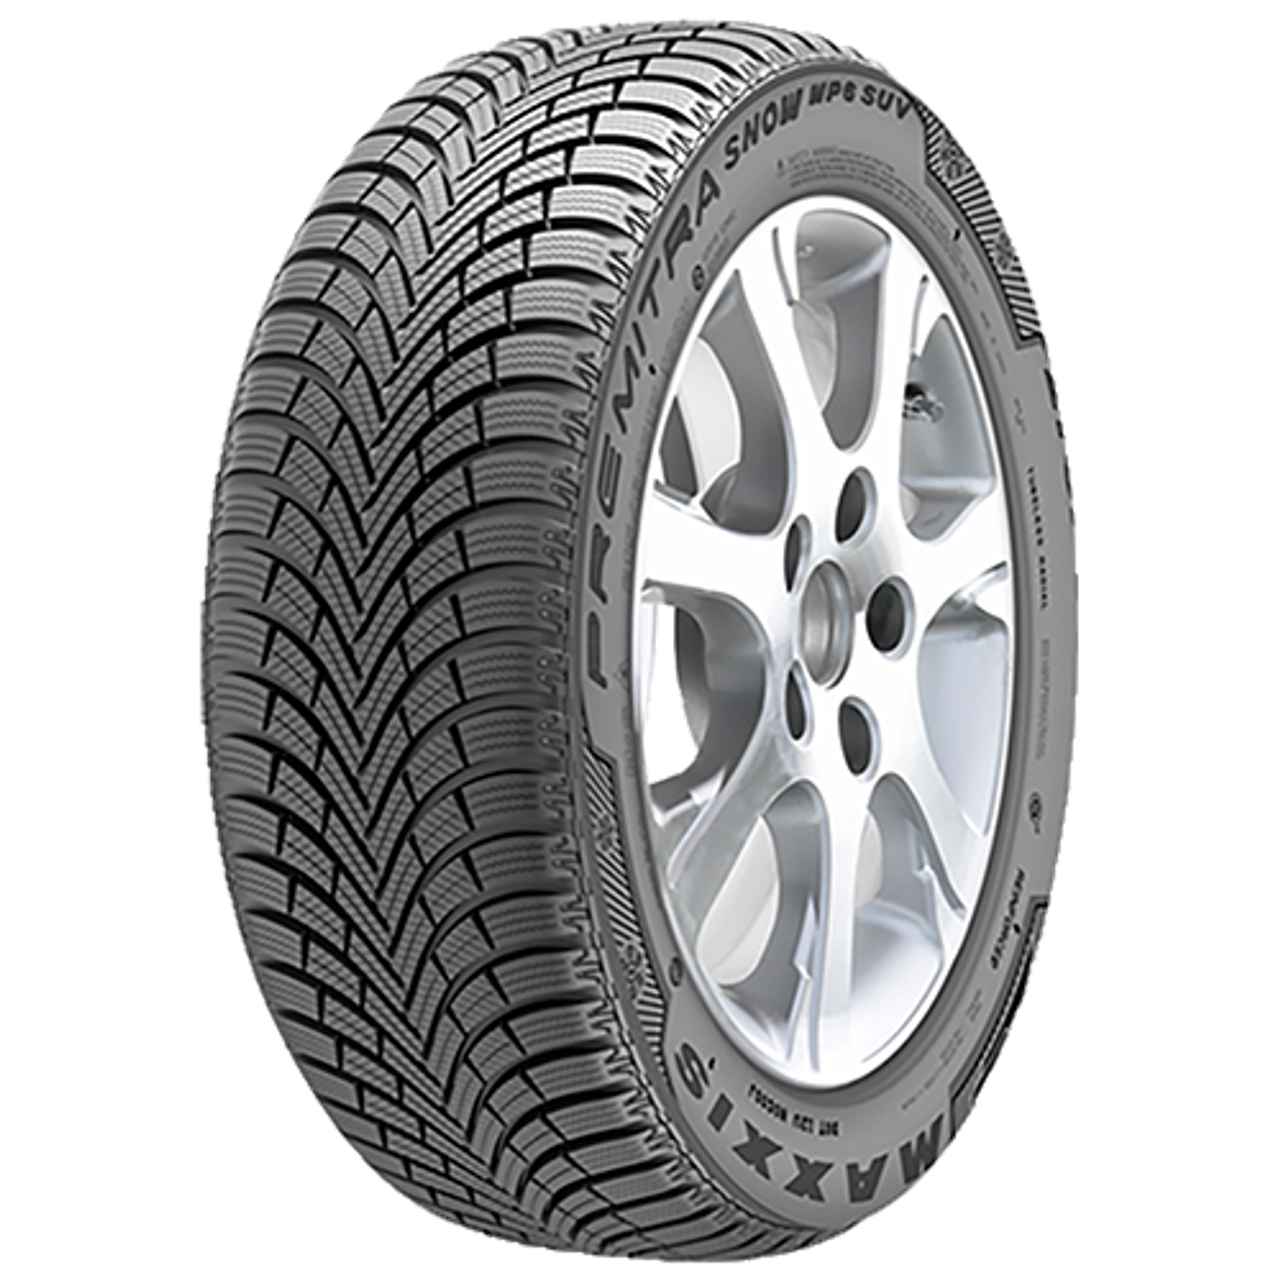 MAXXIS PREMITRA SNOW WP6 SUV 215/60R17 100H BSW XL